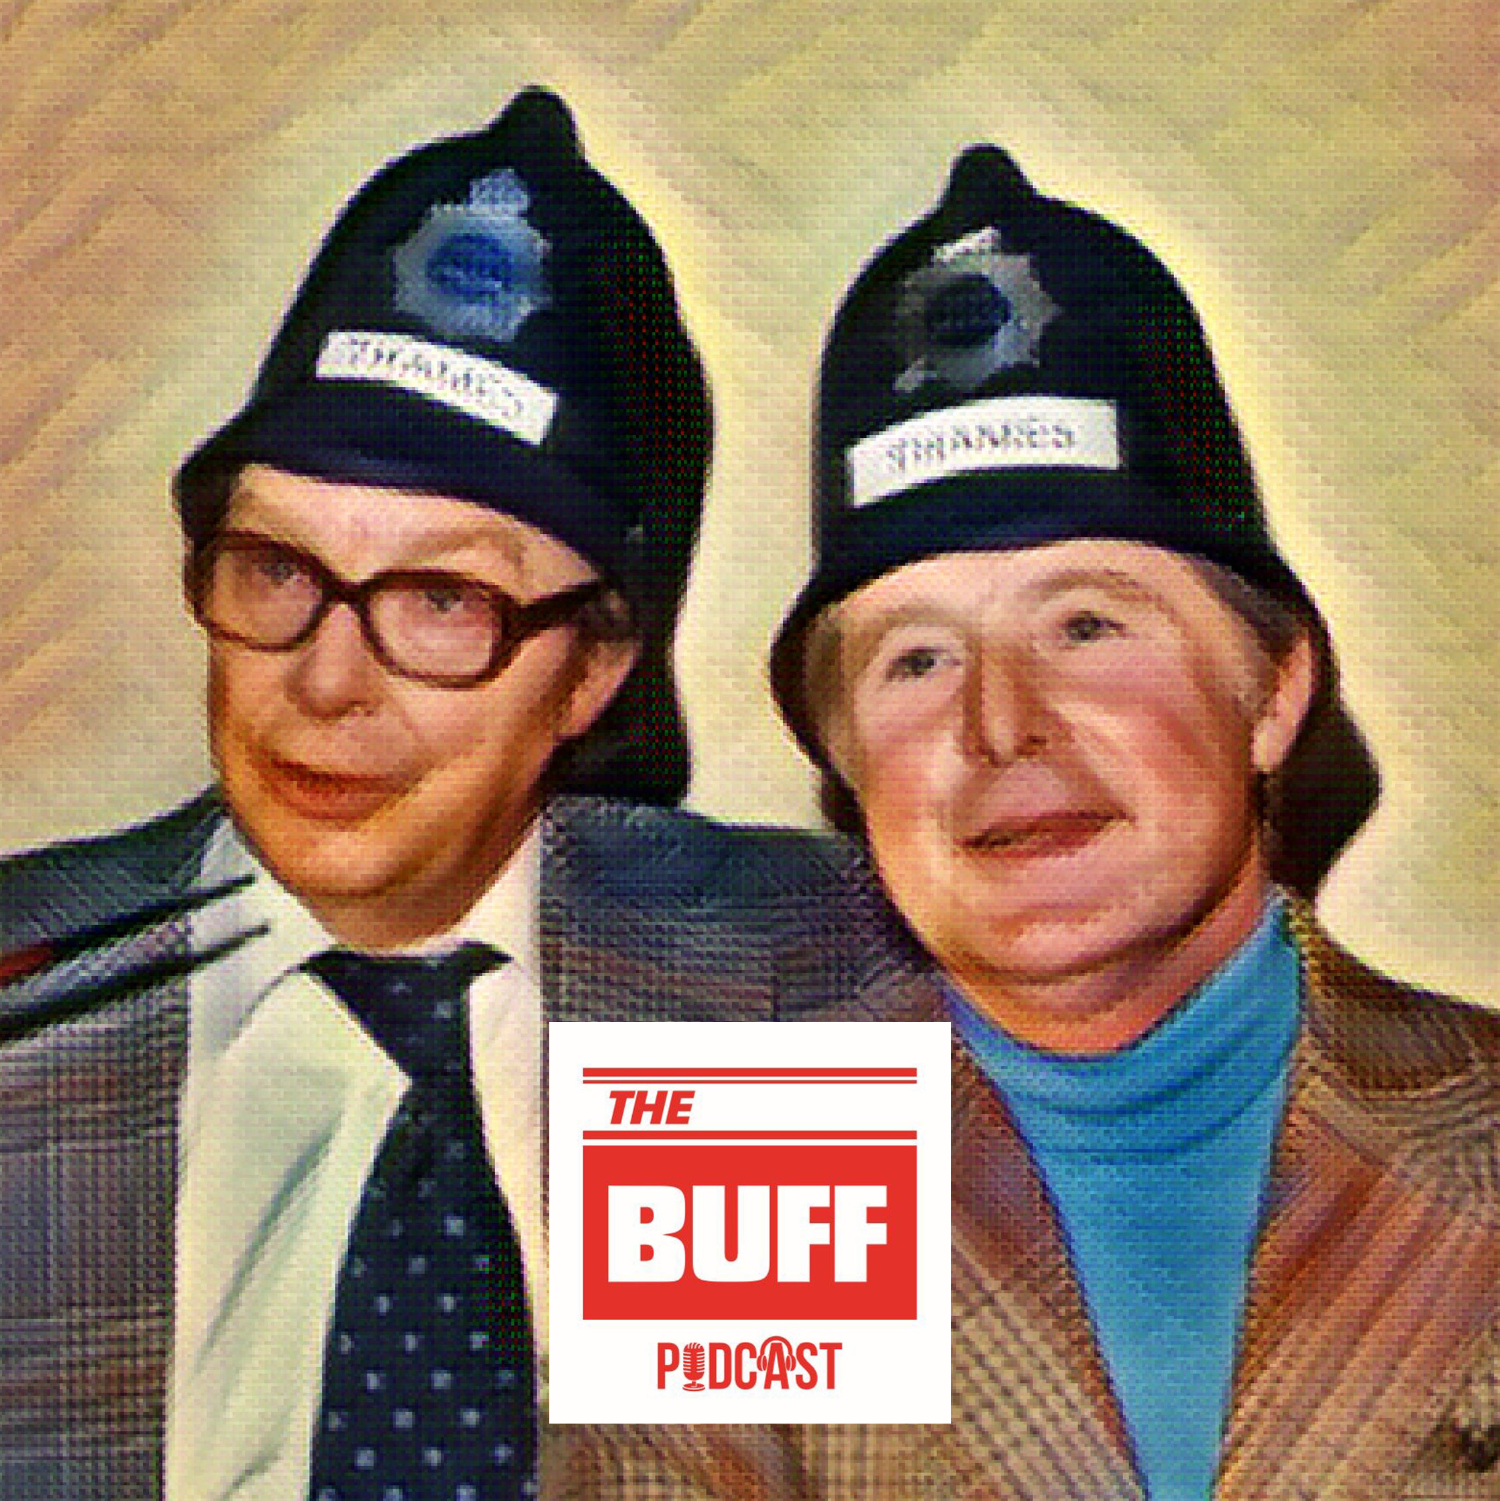 The Buff presents: Vale, Pompey & Morecambe... All the right notes